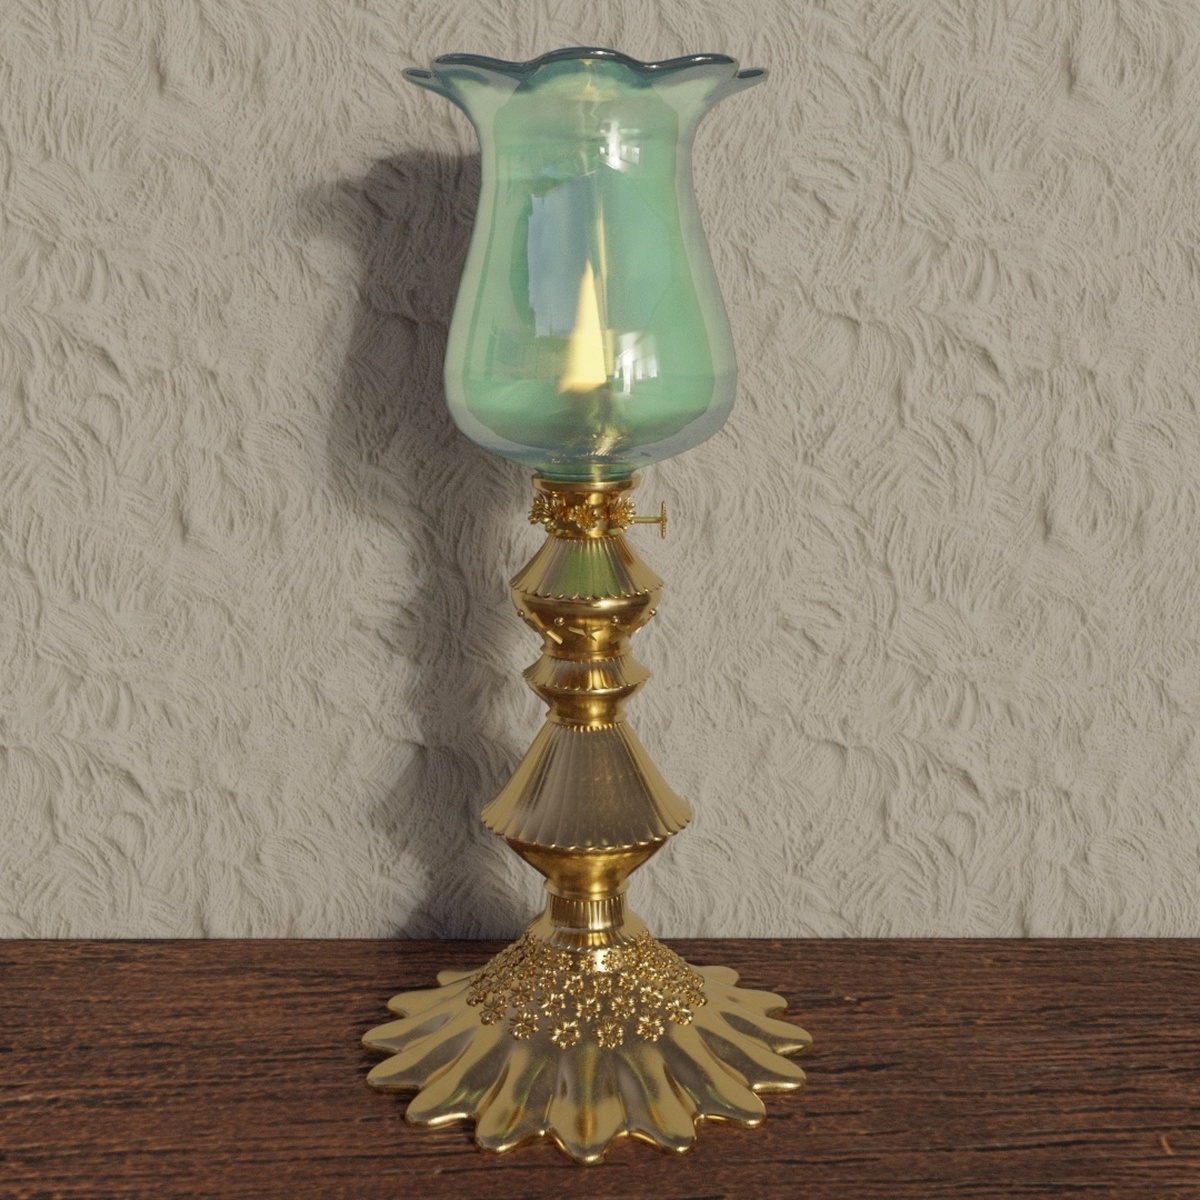 A render of a gas lamp, green glass in a floral shape on a brass stem. It looks more expensive than the other objects